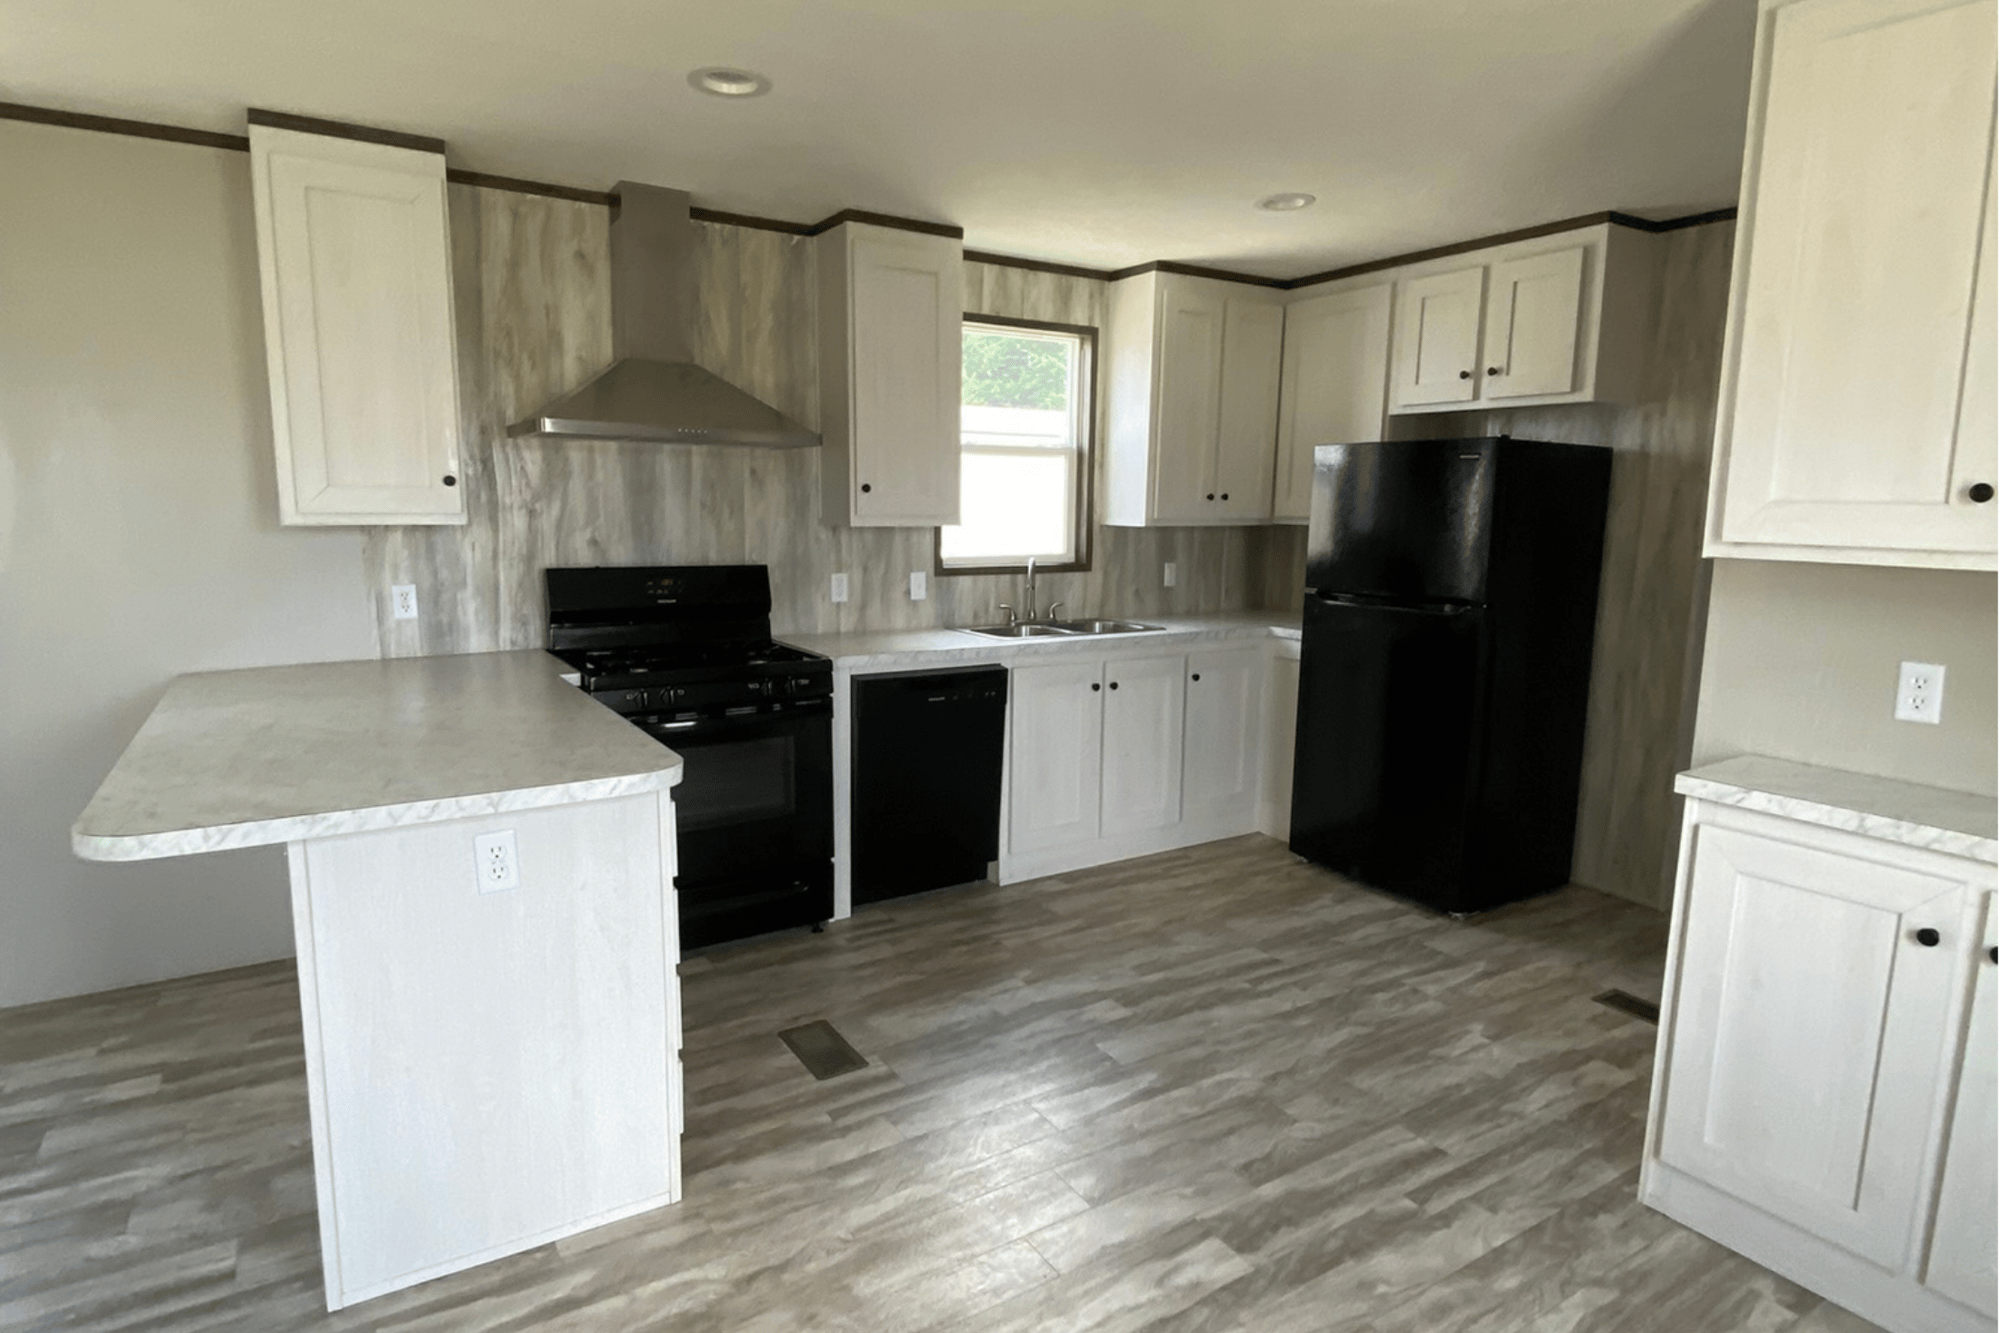 Rivercreek Manufactured Home At Affordable Price